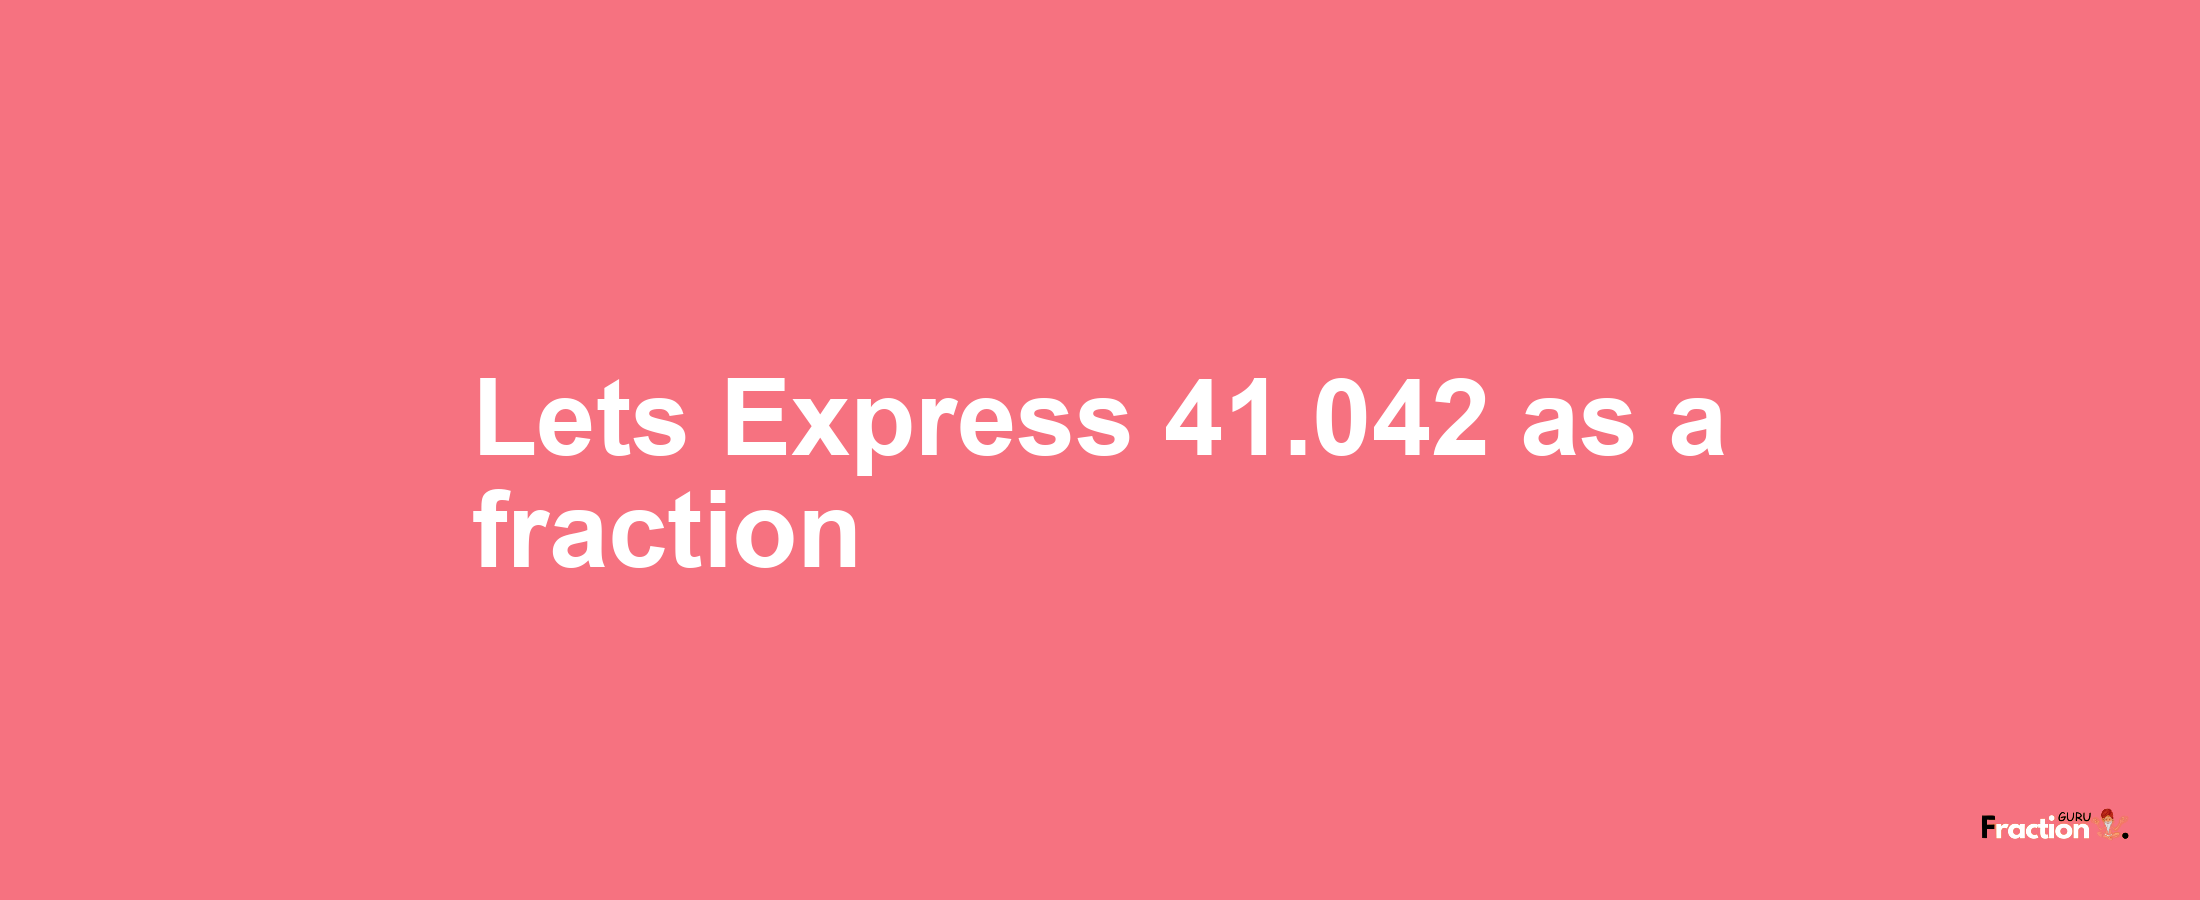 Lets Express 41.042 as afraction